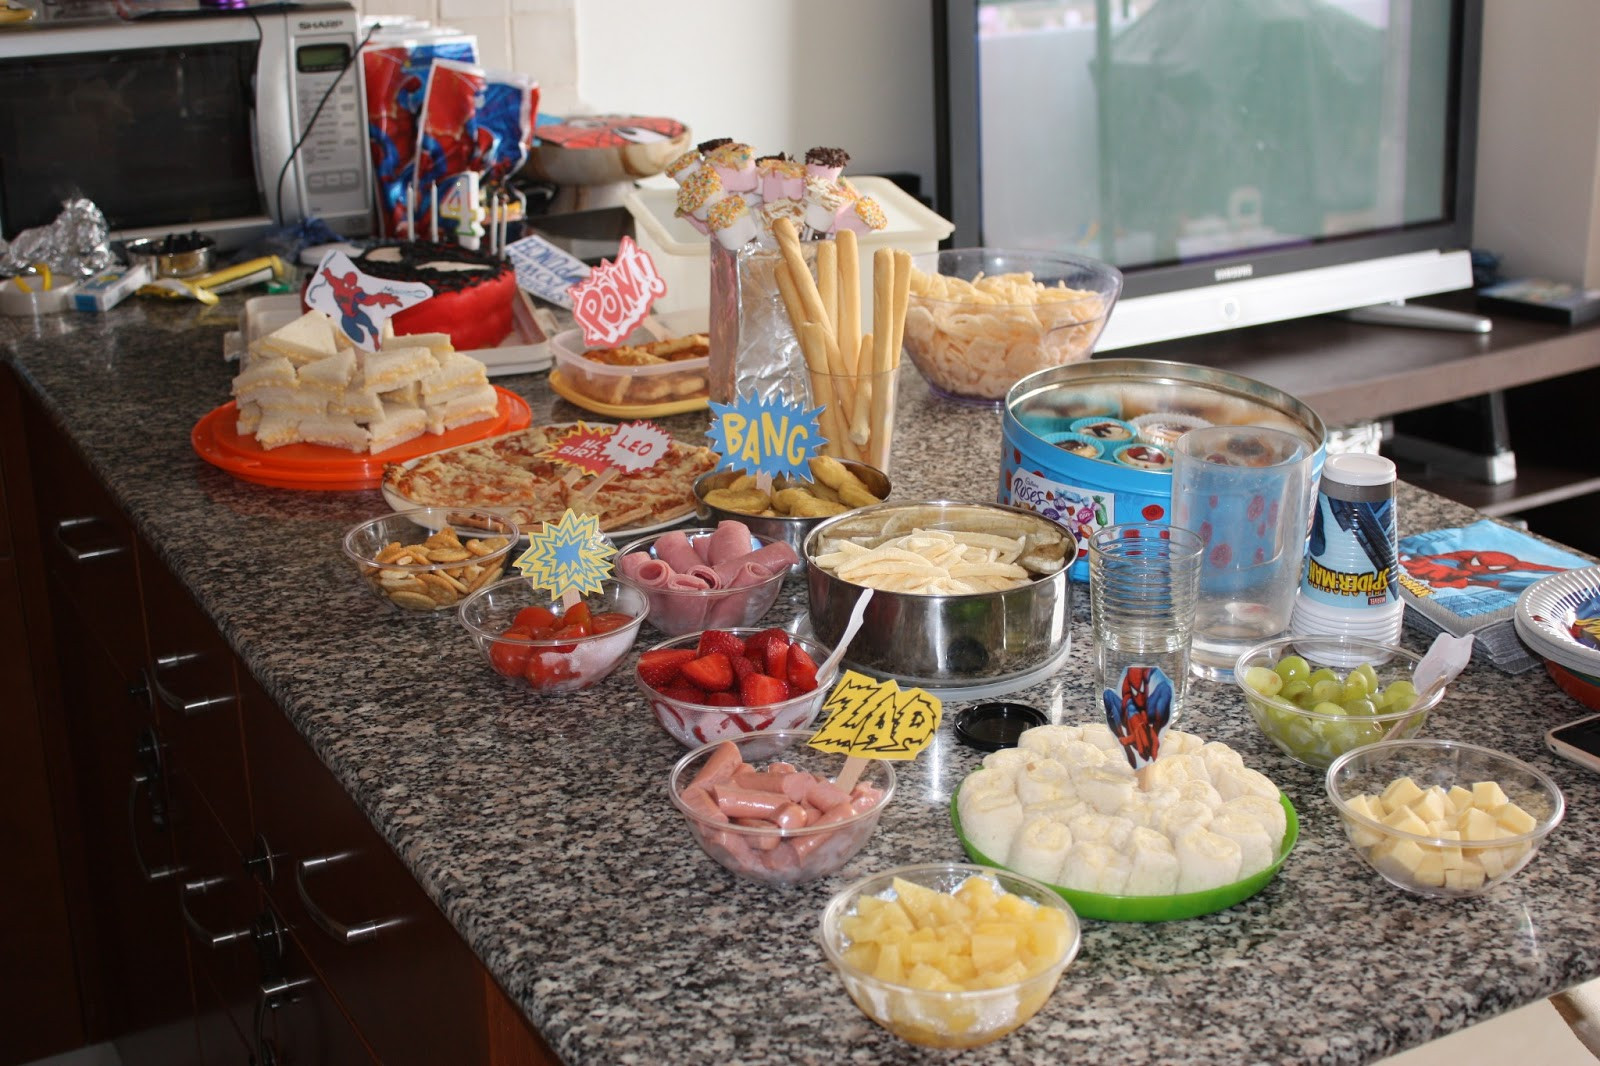 Spiderman Party Food Ideas
 An Amazing Spiderman Party